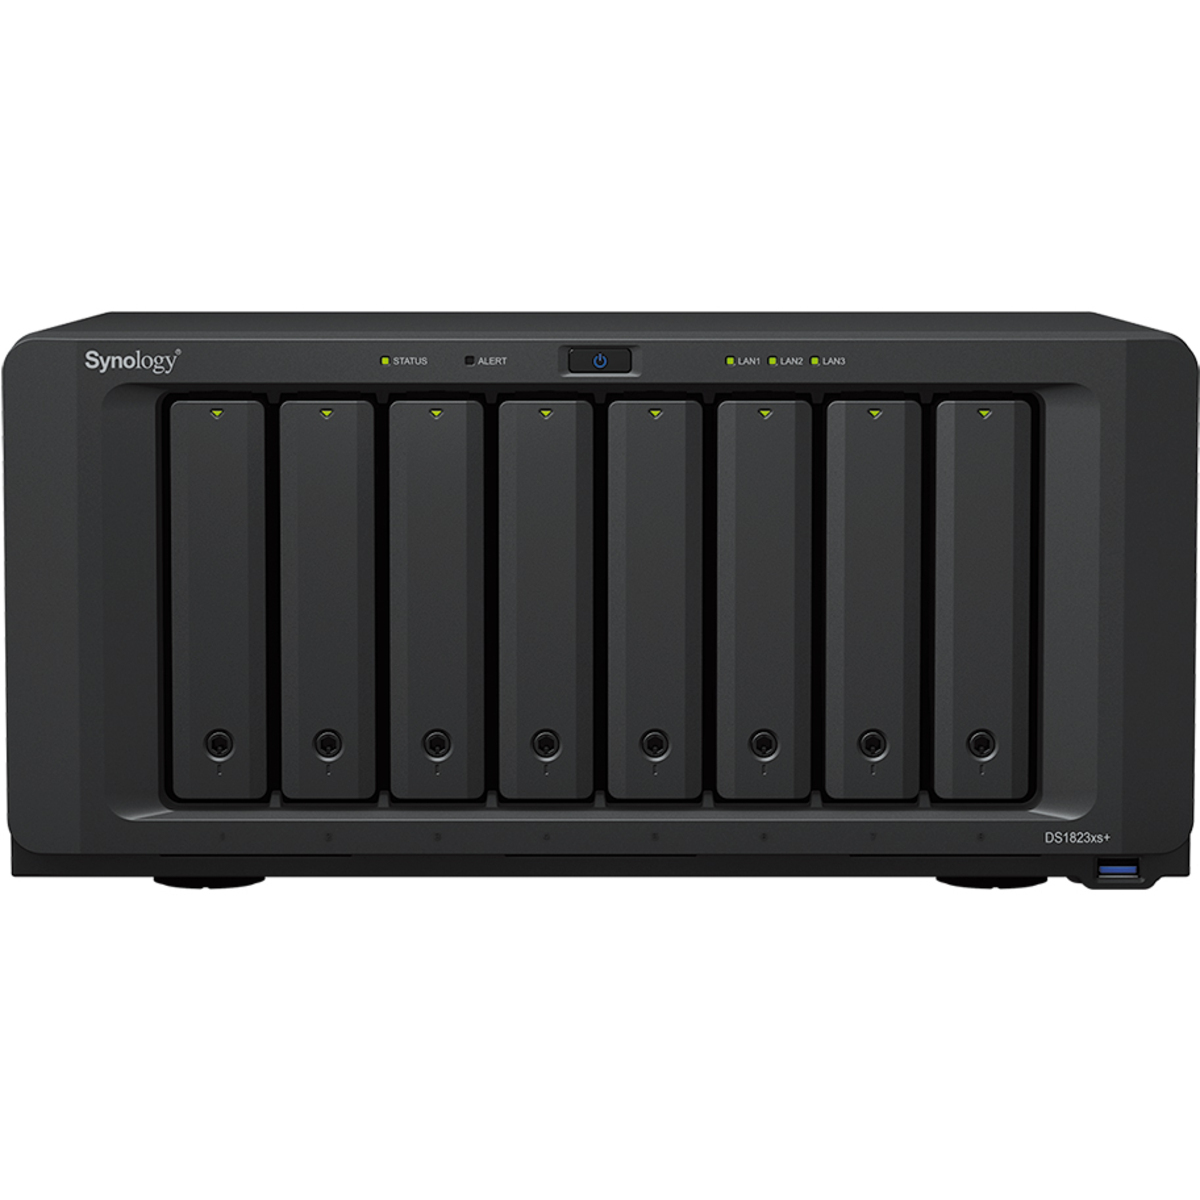 Synology DiskStation DS1823xs+ 64tb 8-Bay Desktop Multimedia / Power User / Business NAS - Network Attached Storage Device 4x16tb Seagate IronWolf ST16000VN001 3.5 7200rpm SATA 6Gb/s HDD NAS Class Drives Installed - Burn-In Tested DiskStation DS1823xs+